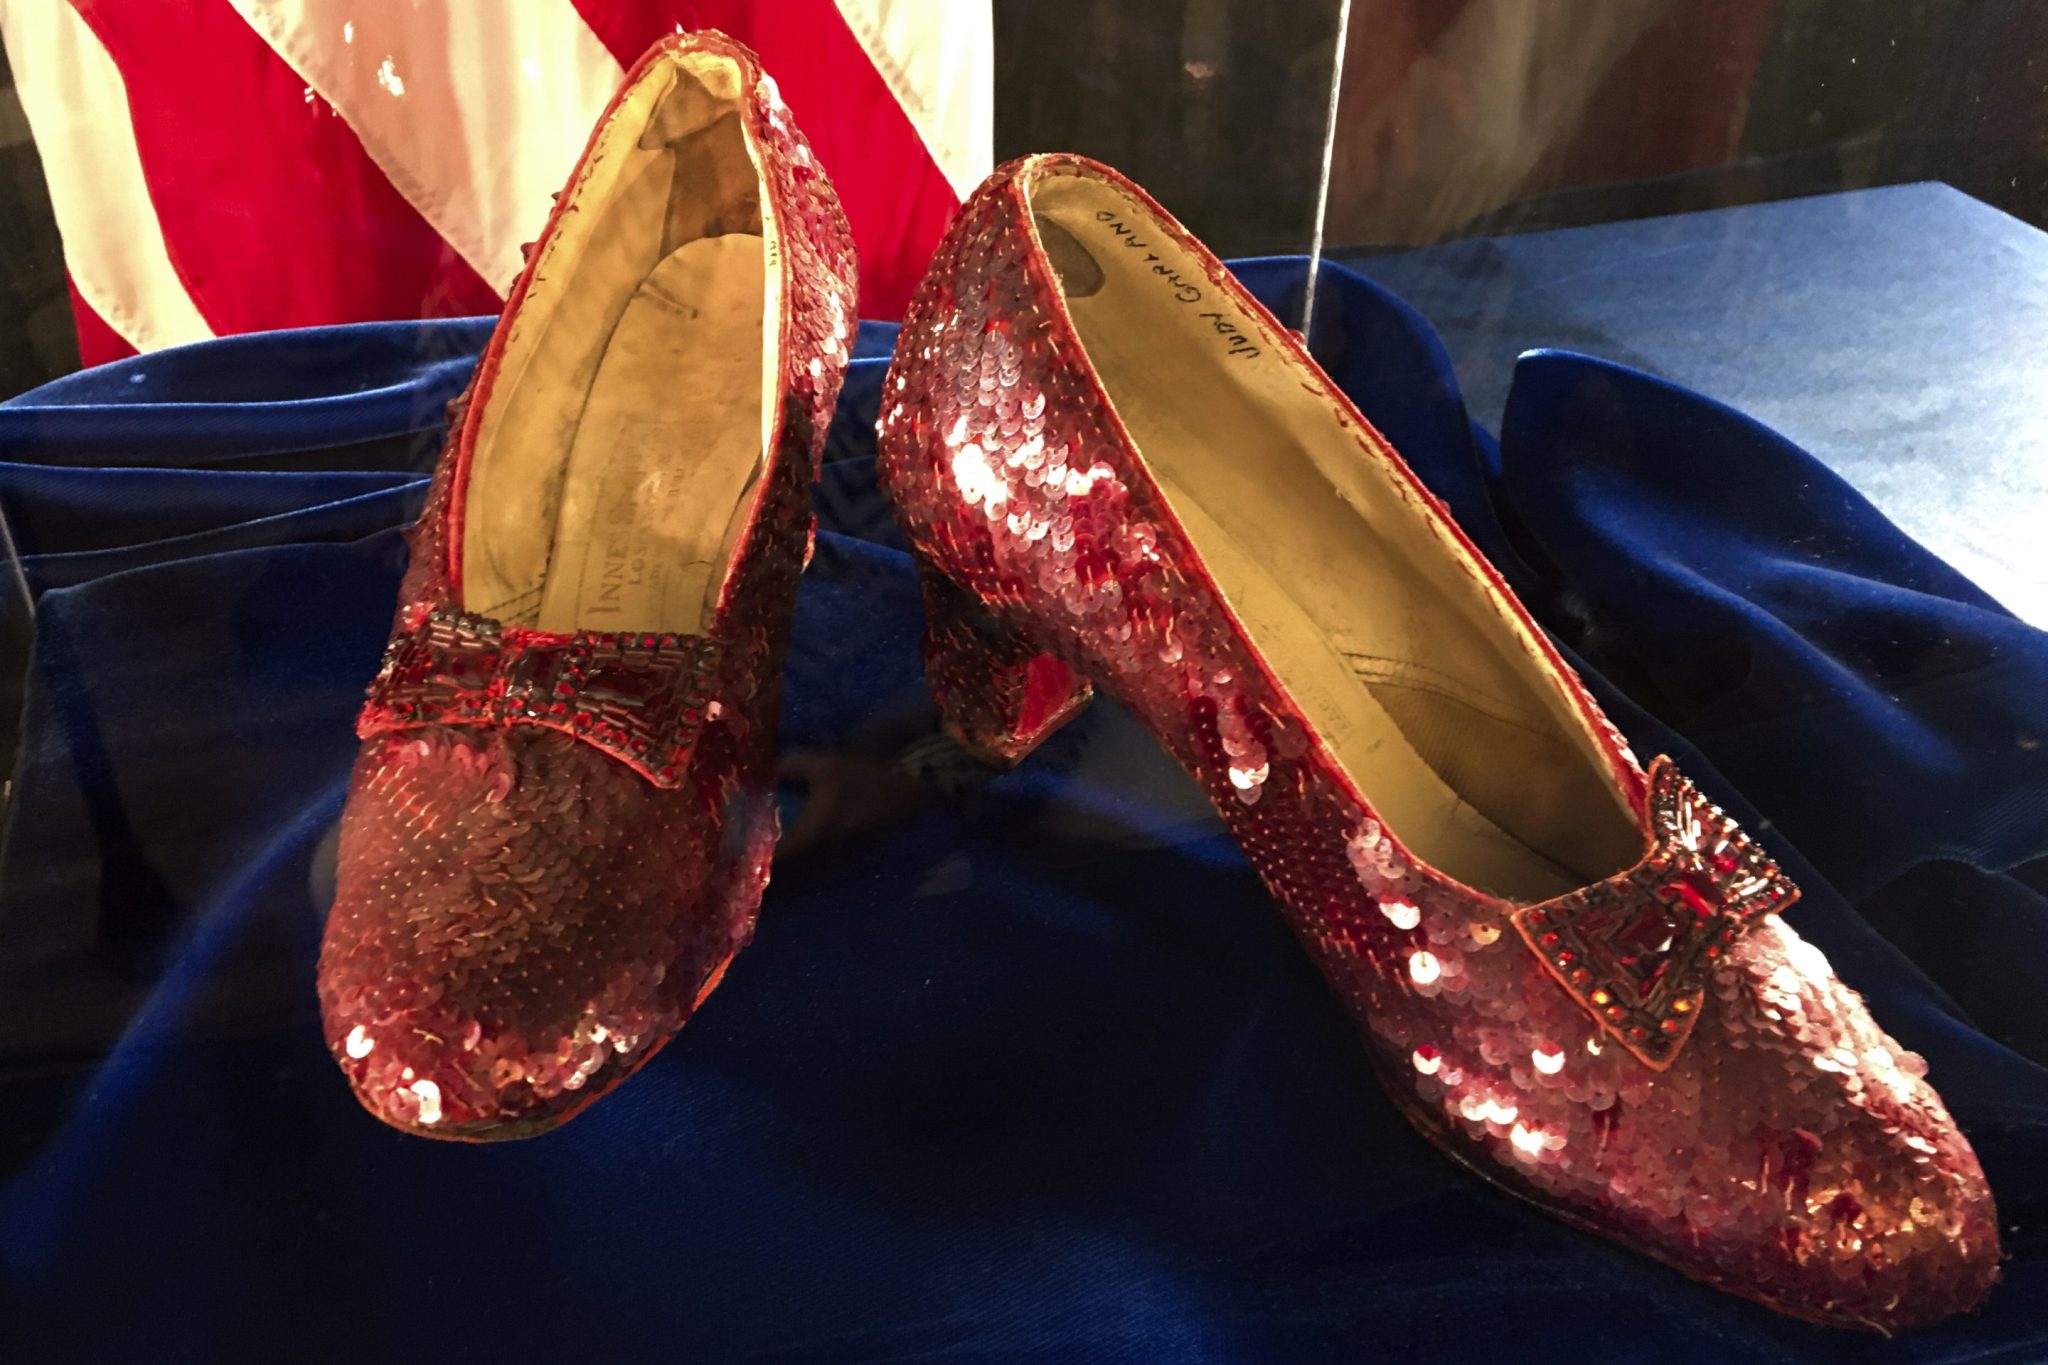 Ruby slippers thief: Aging mobster avoids jail sentence but has to pay $300 per month